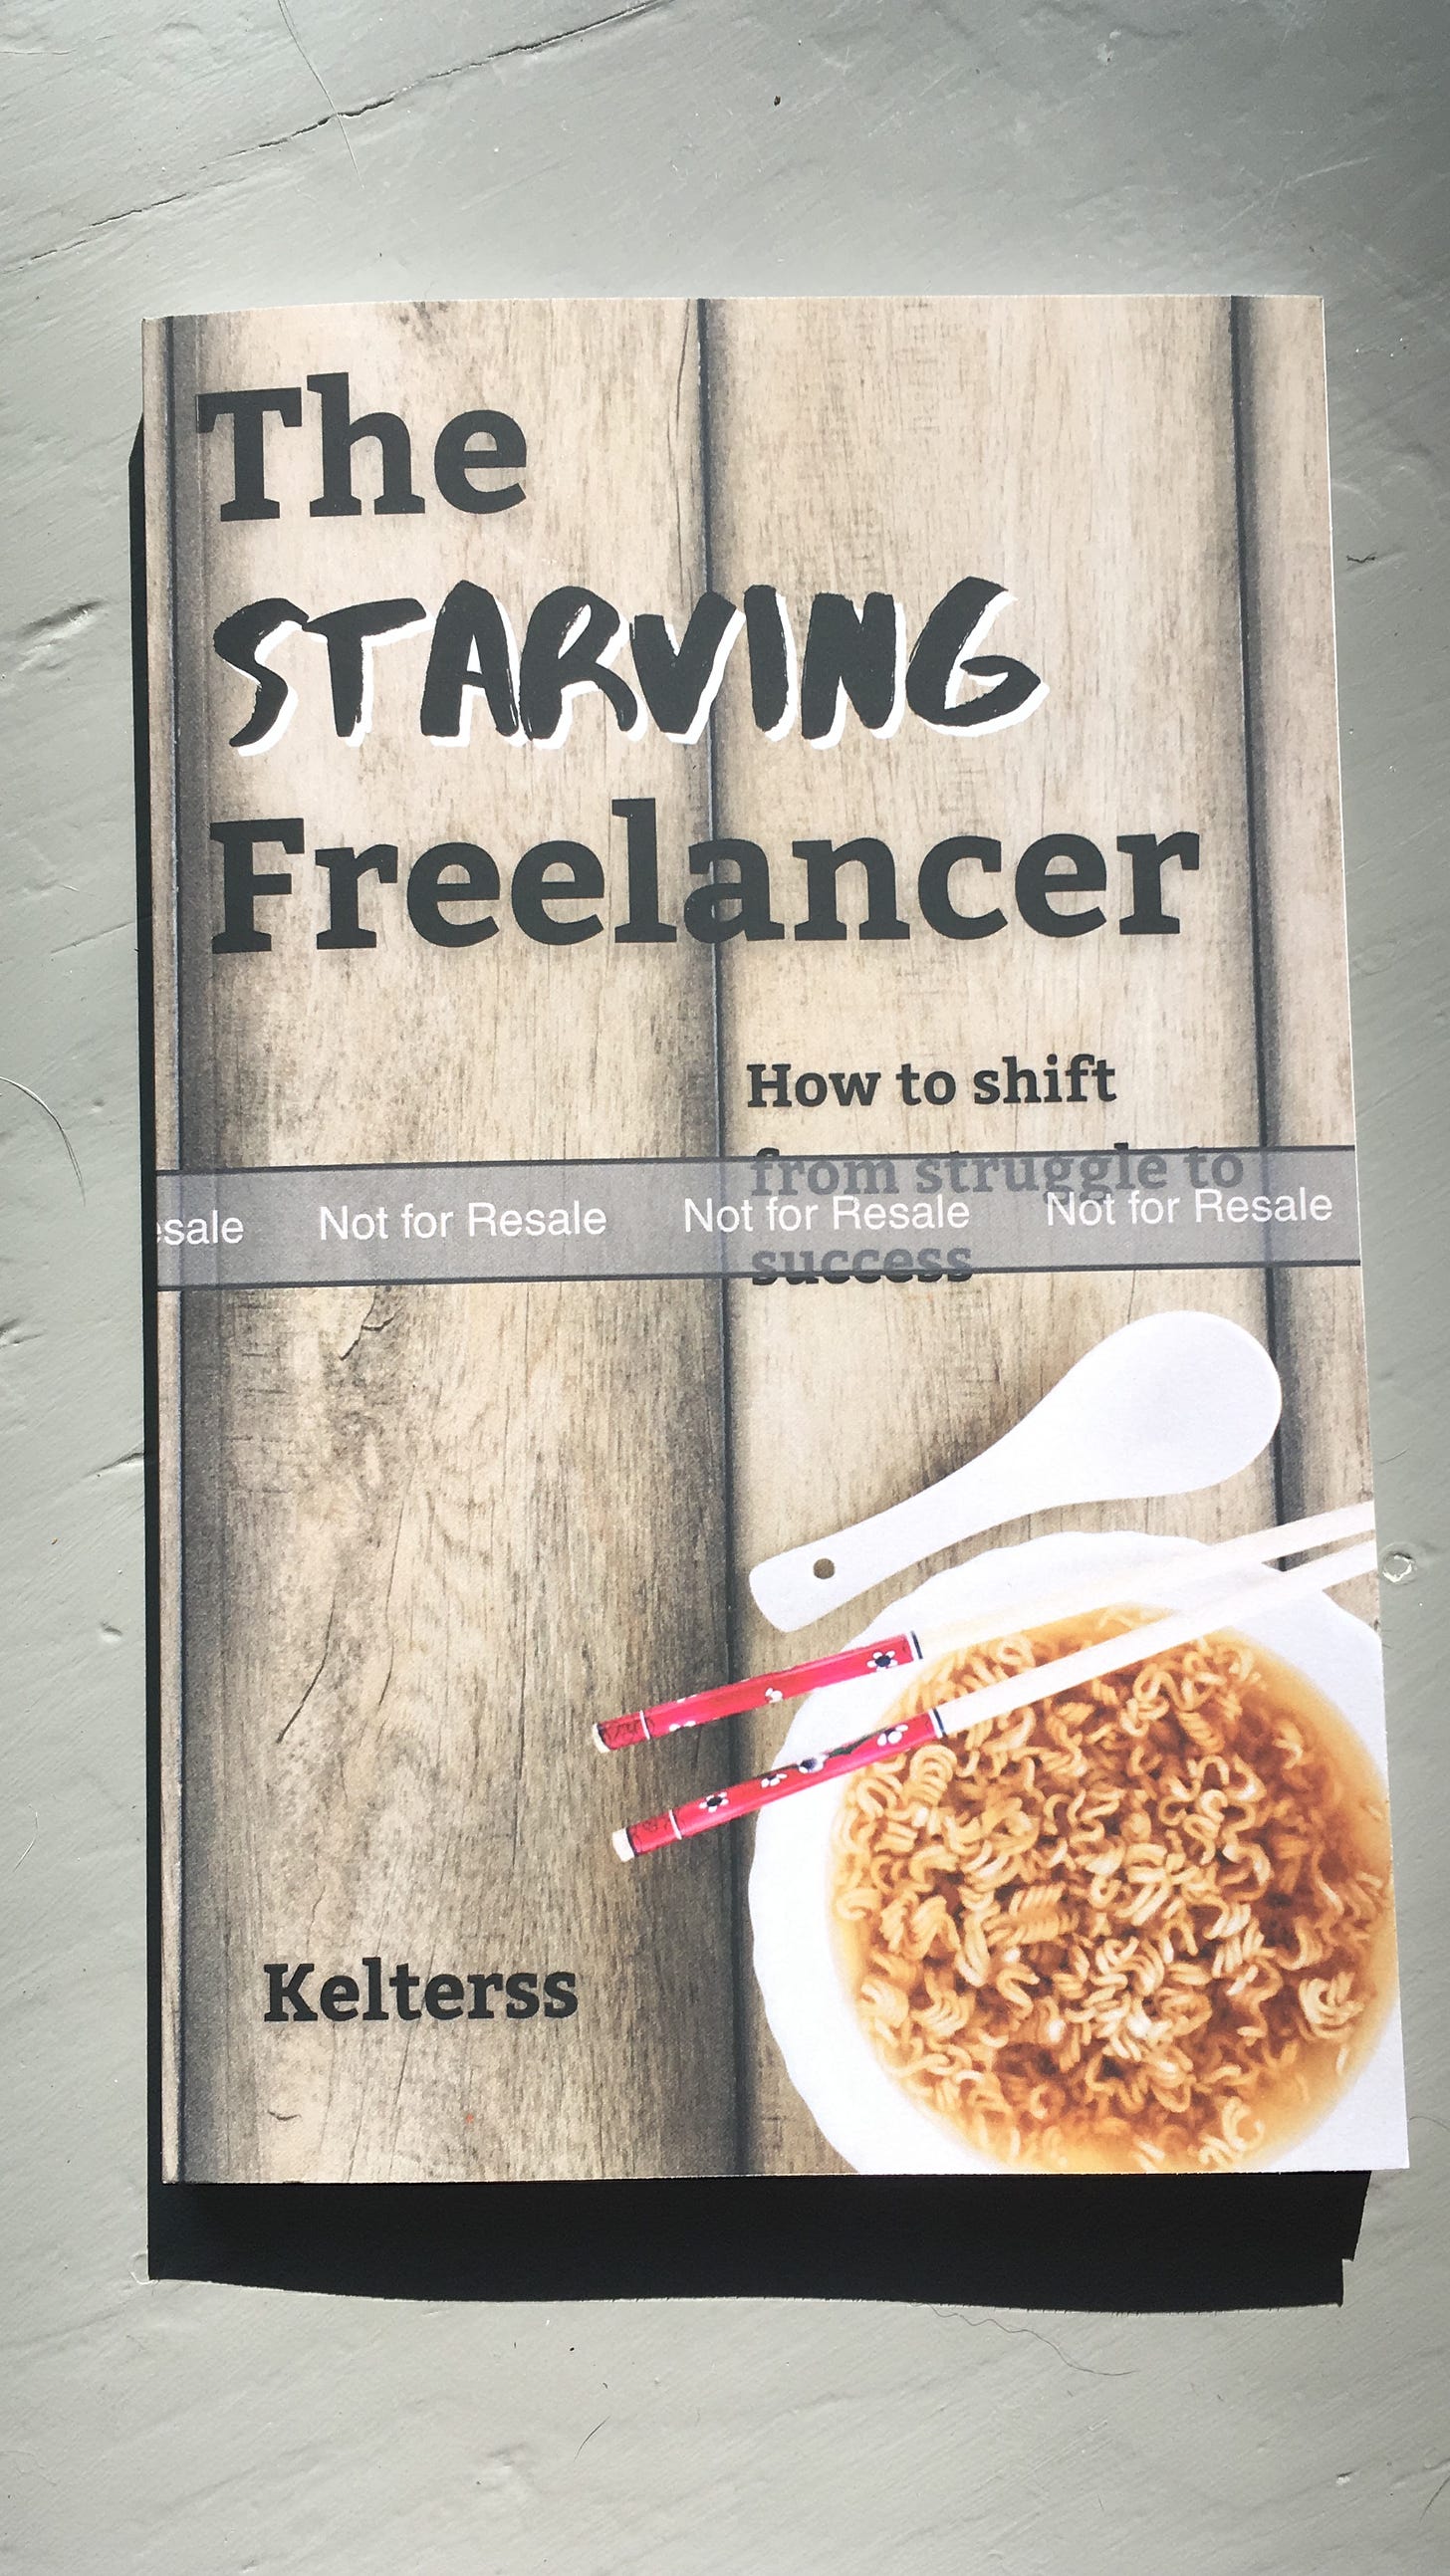 The front of my upcoming book, The Starving Freelancer: How to shift from struggle to success